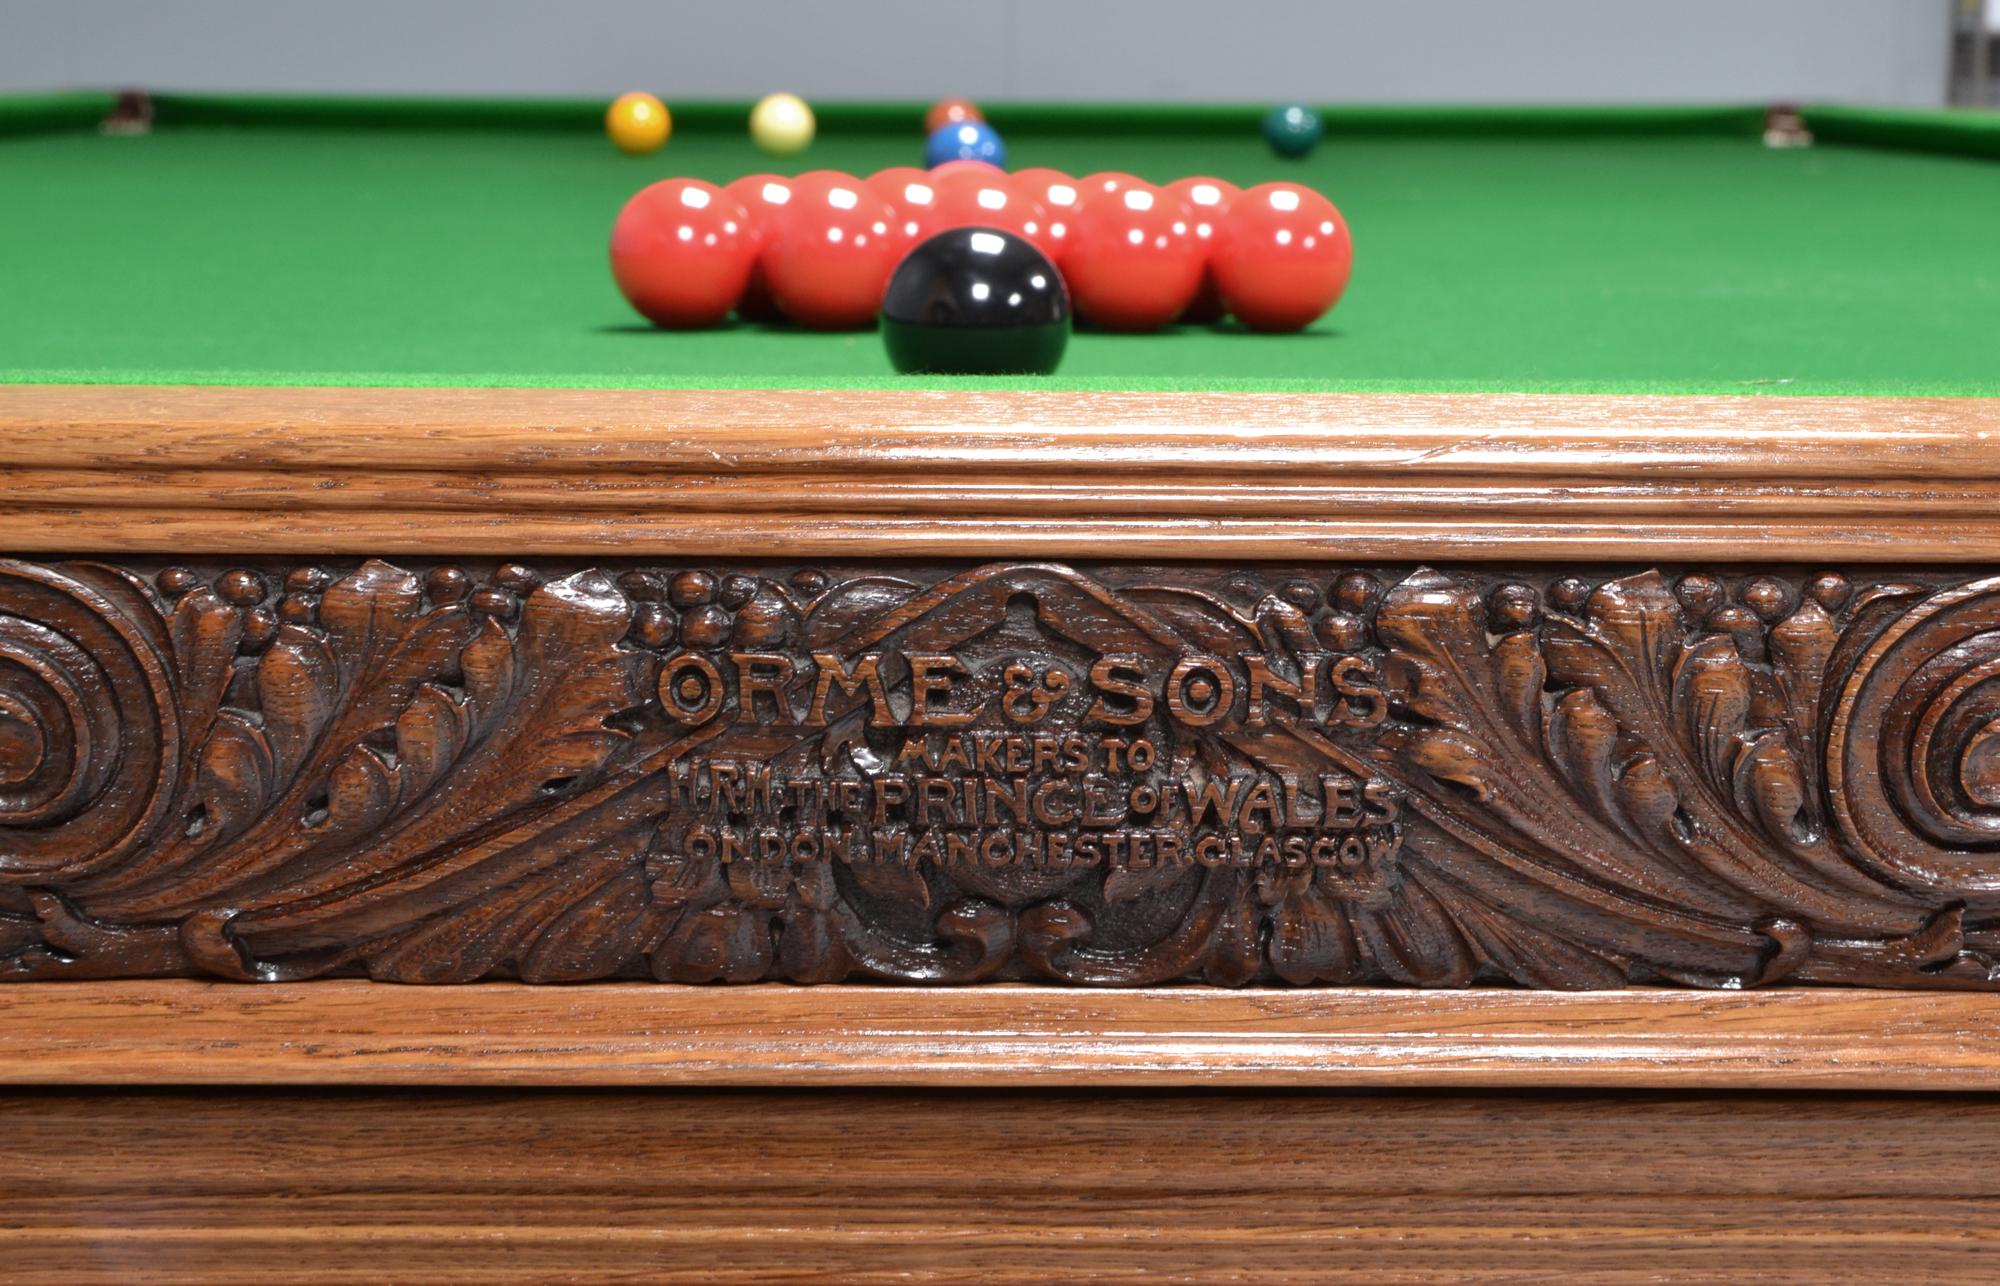 A wonderful Exhibition Quality English billiard or snooker table By Orme and Sons of Manchester and London.

Probably the finest billiard - snooker table on the open market today,outstanding quality with huge presence!

Constructed from solid oak